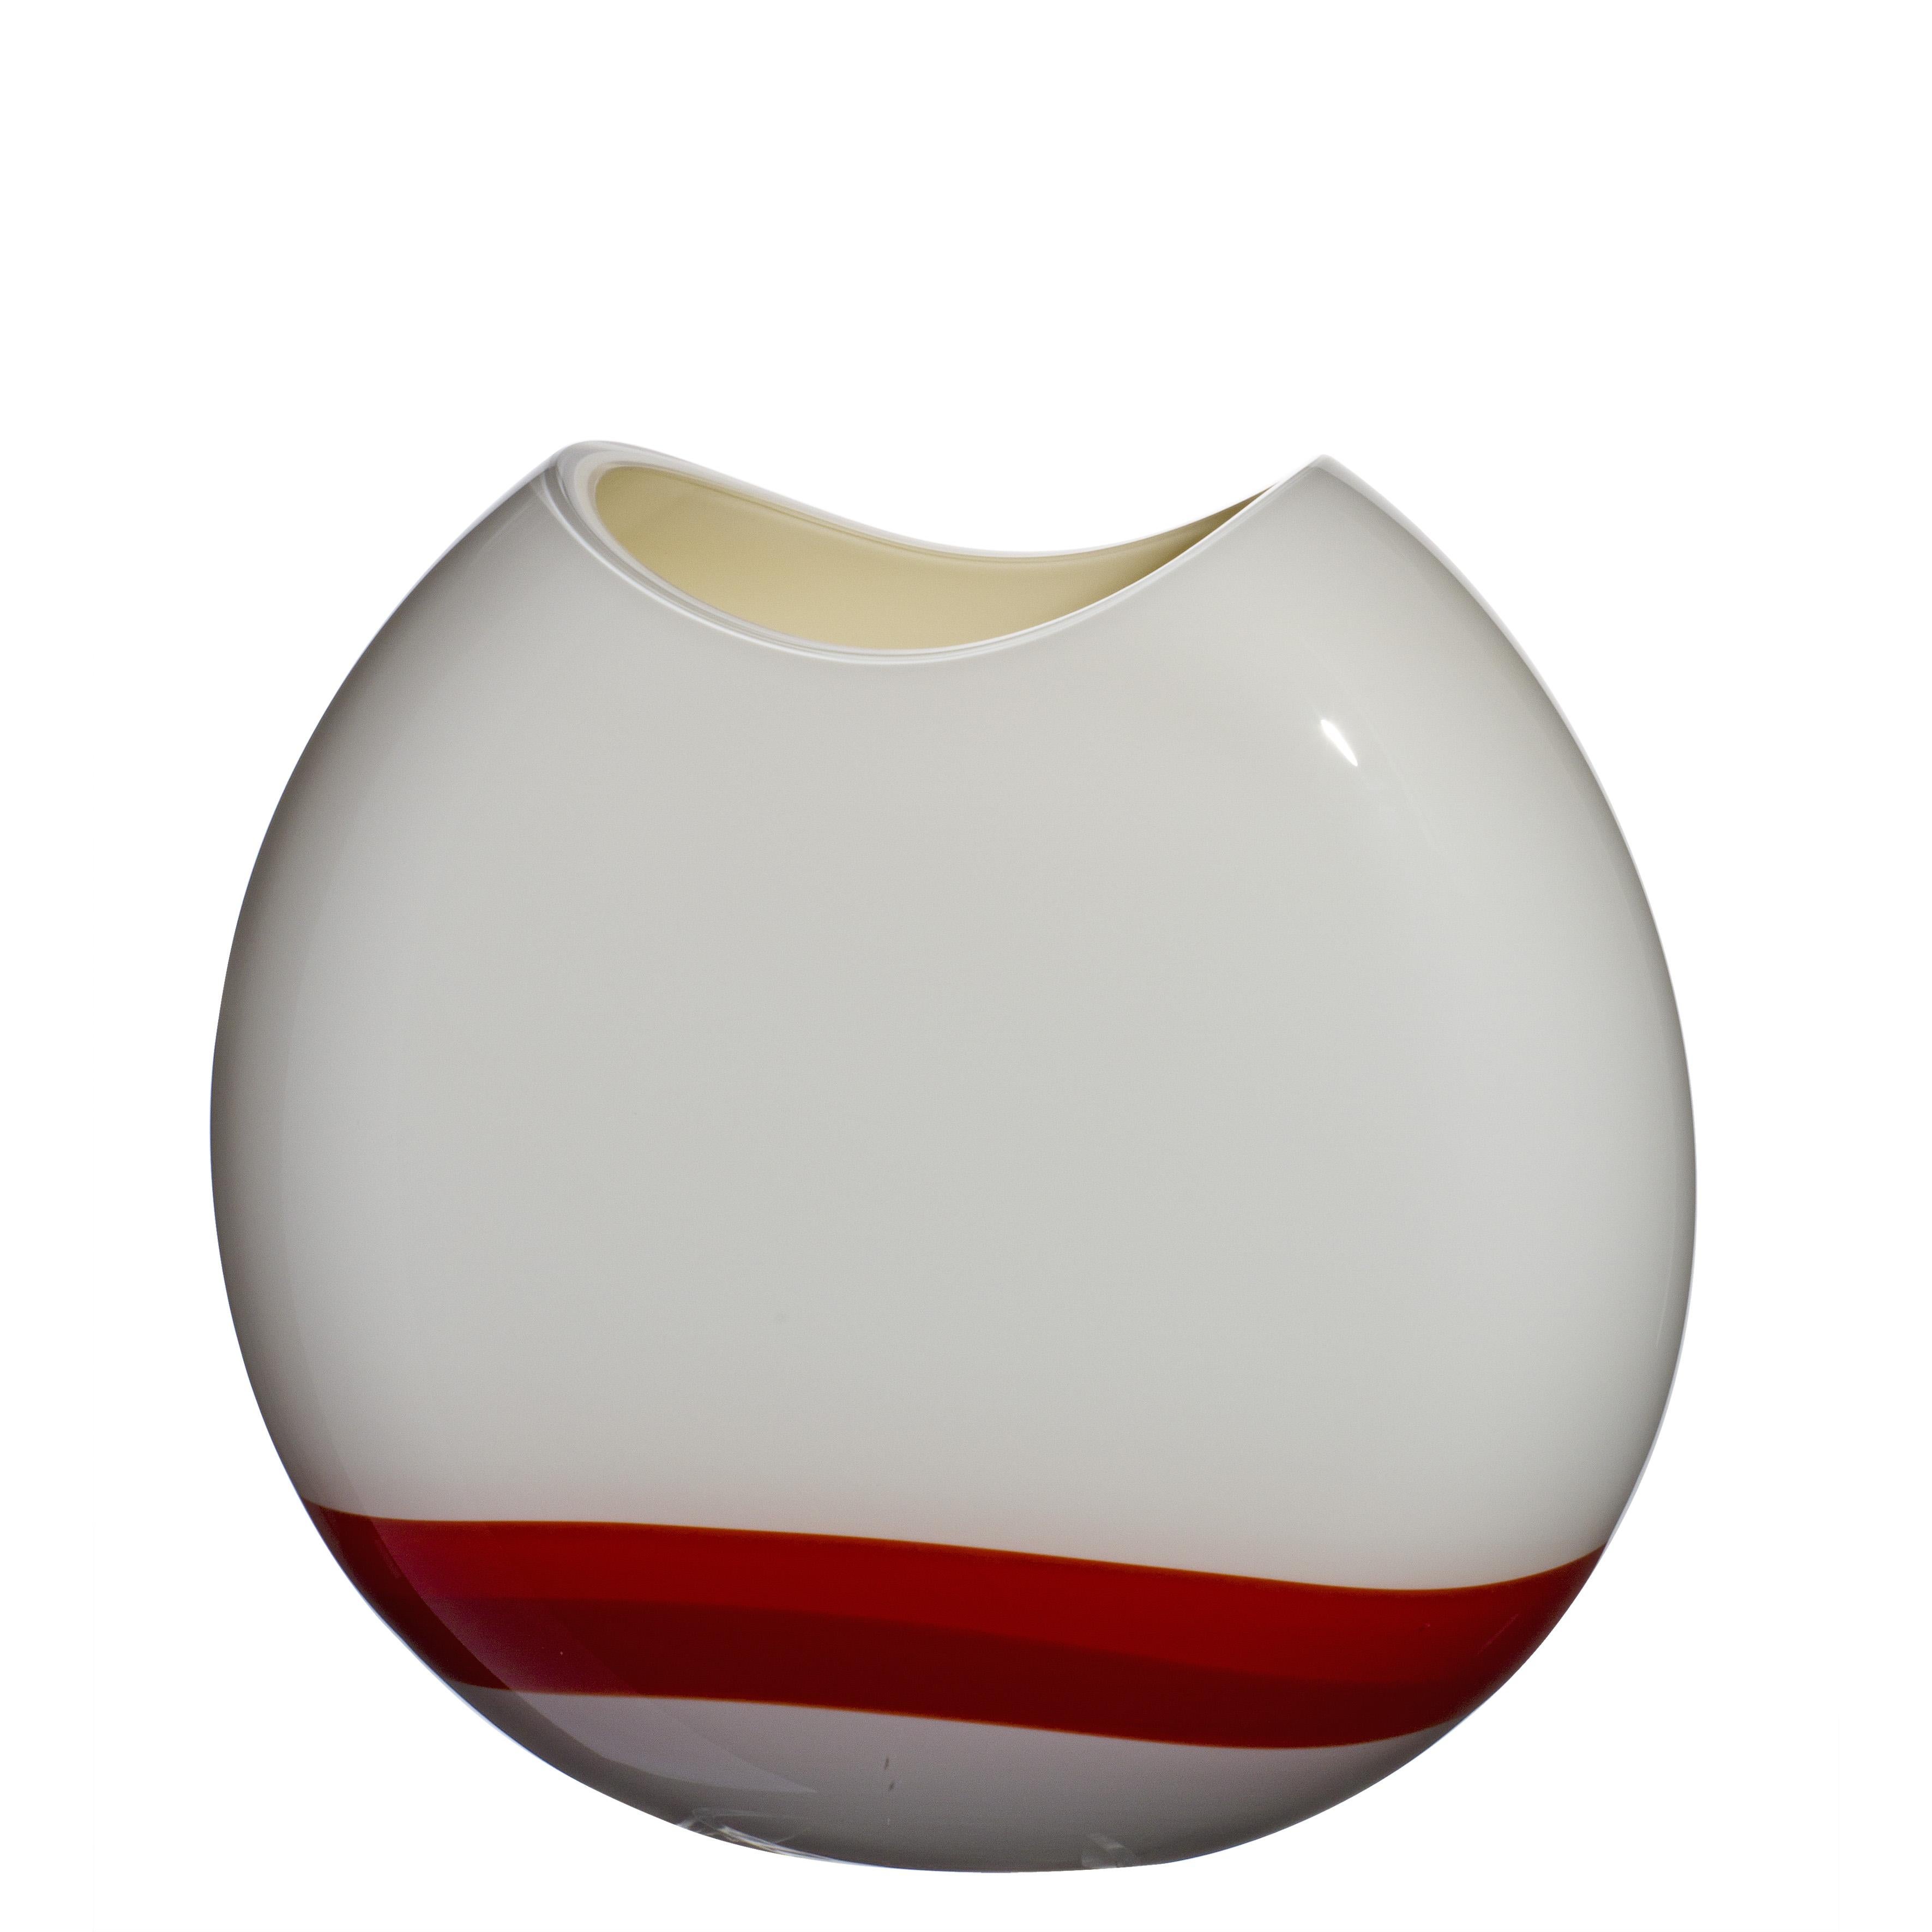 Small Eclissi Vase in Red, Ivory, and Grey by Carlo Moretti